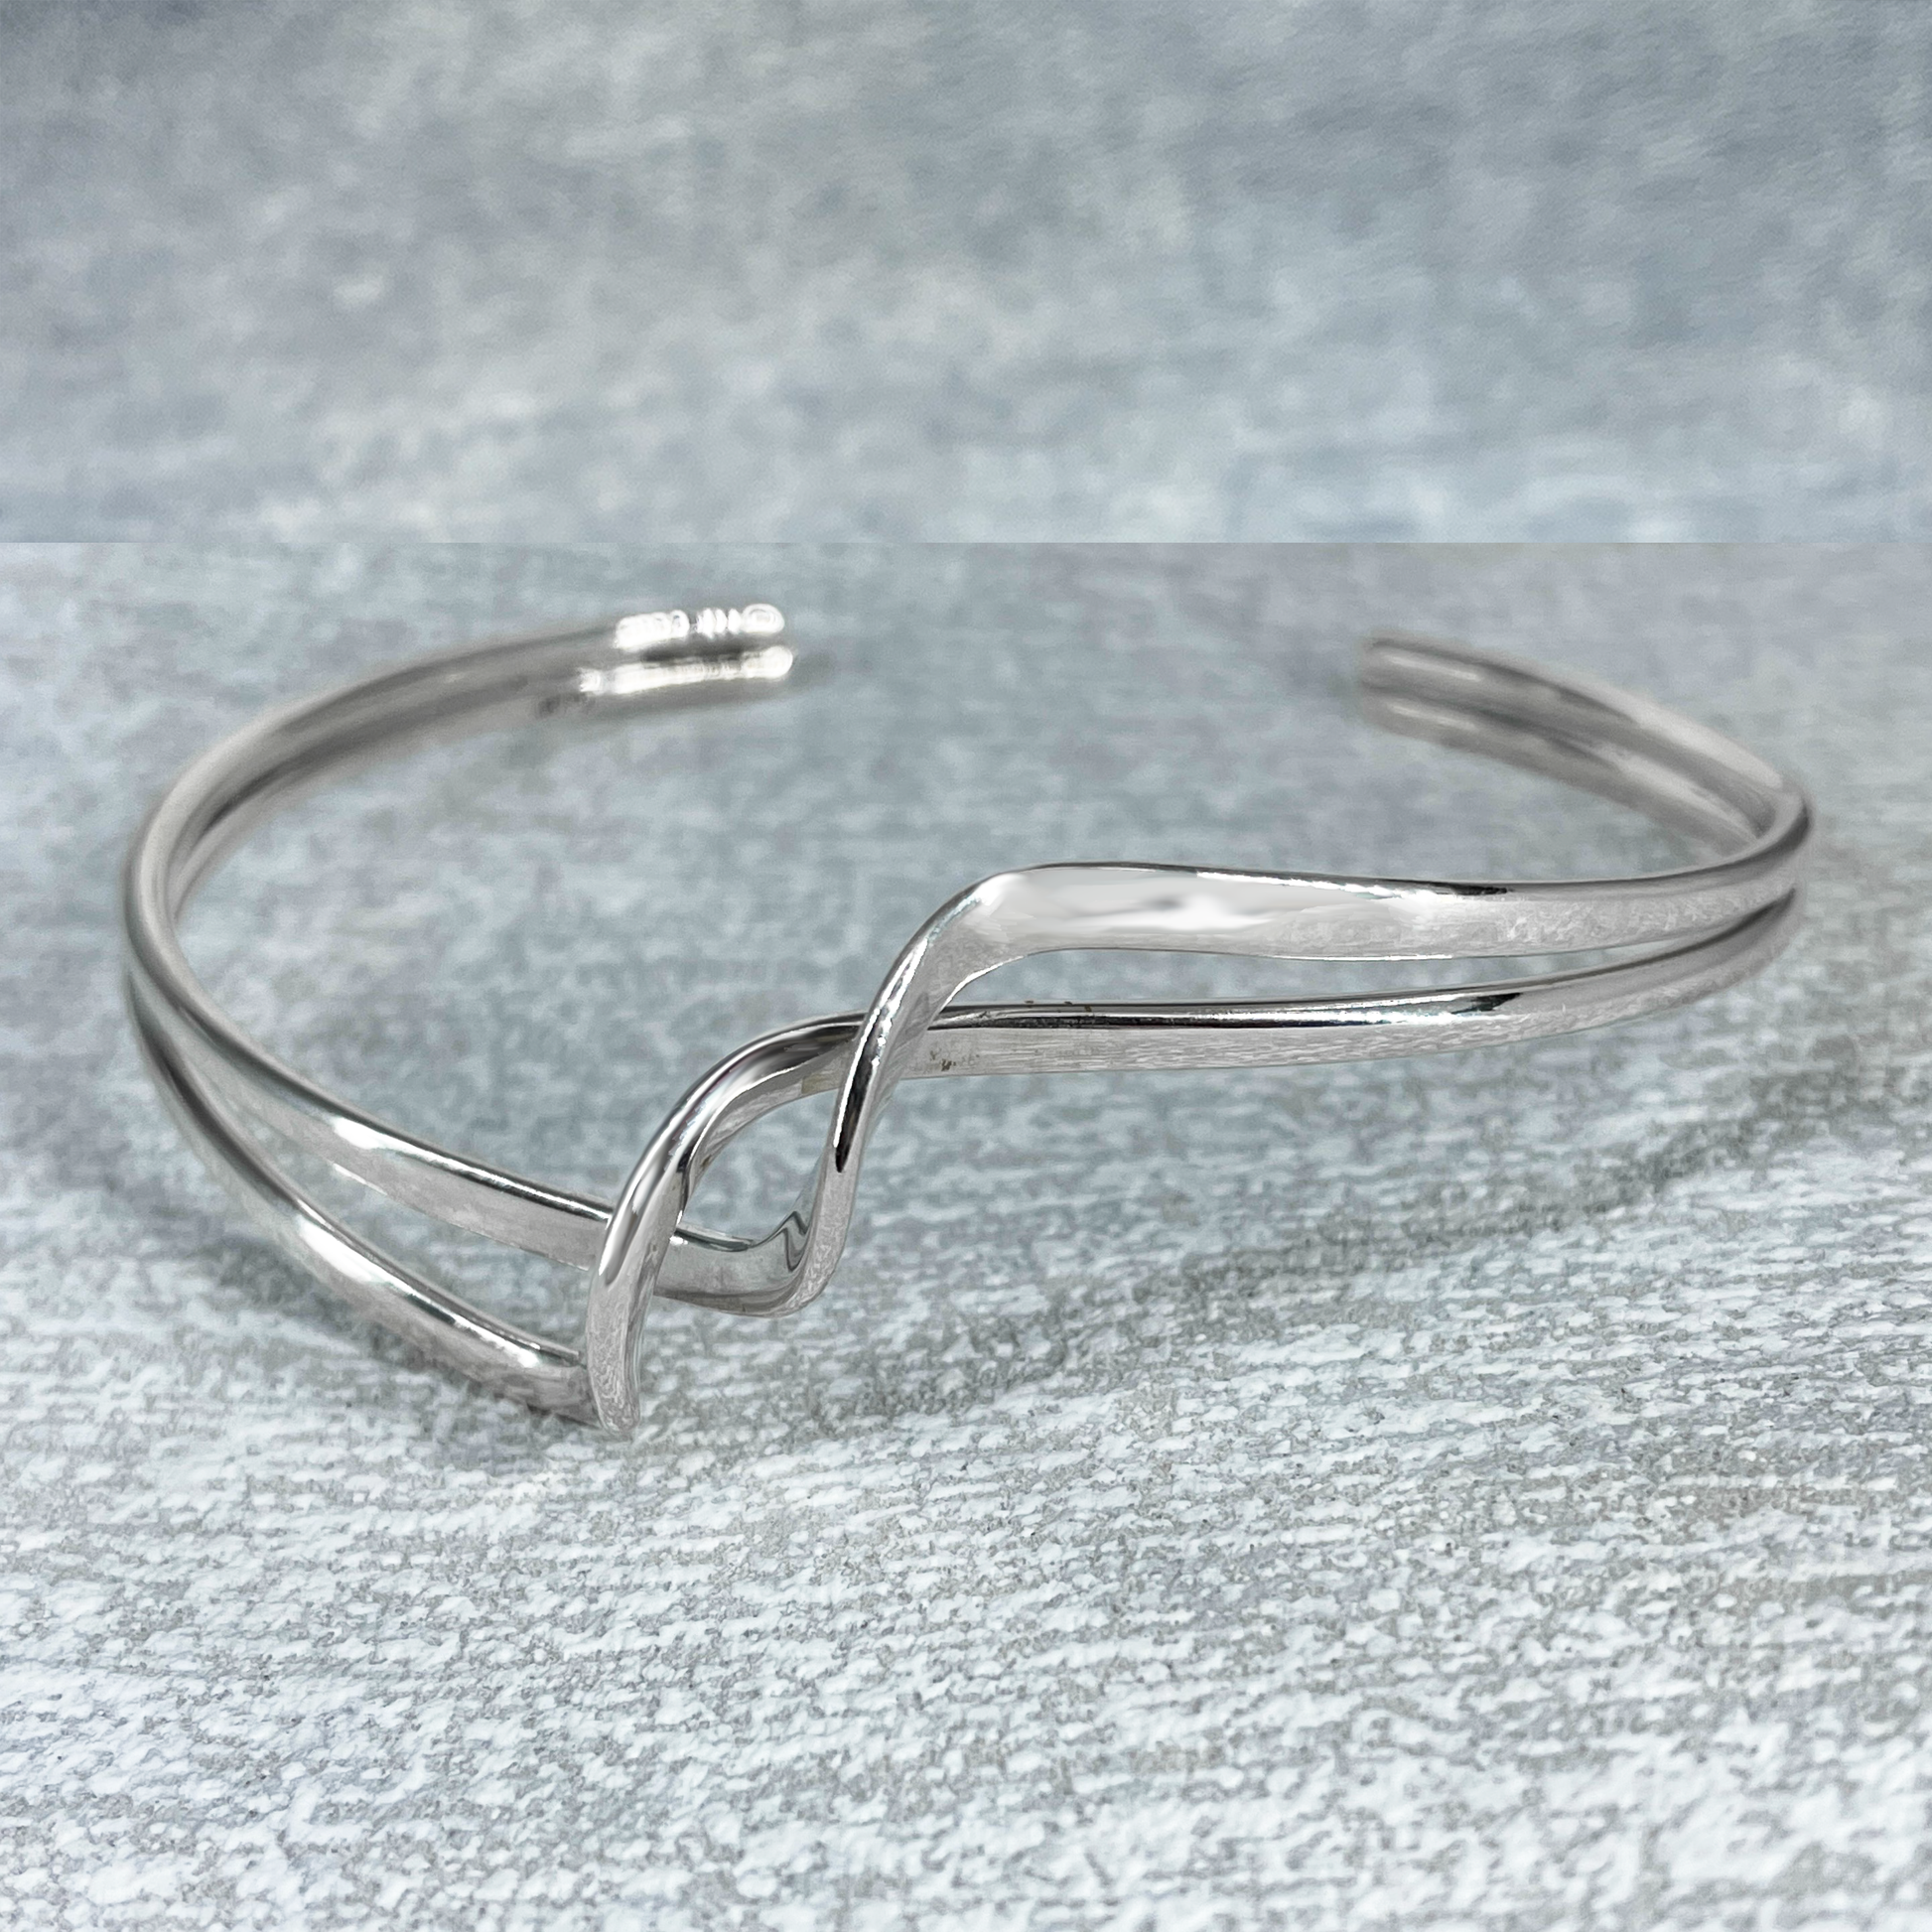 Uisce - Soft Double Wave with Crest Cuff Silver Bracelet, meticulously crafted from sterling silver and polished to perfection. This bracelet offers a thickness of 2 millimetres and can be effortlessly adjusted to ensure a perfect fit. Measuring 15 cm on the inner length and 16 cm on the outer length, with a width of 2 cm at its widest point and a 3 cm gap.